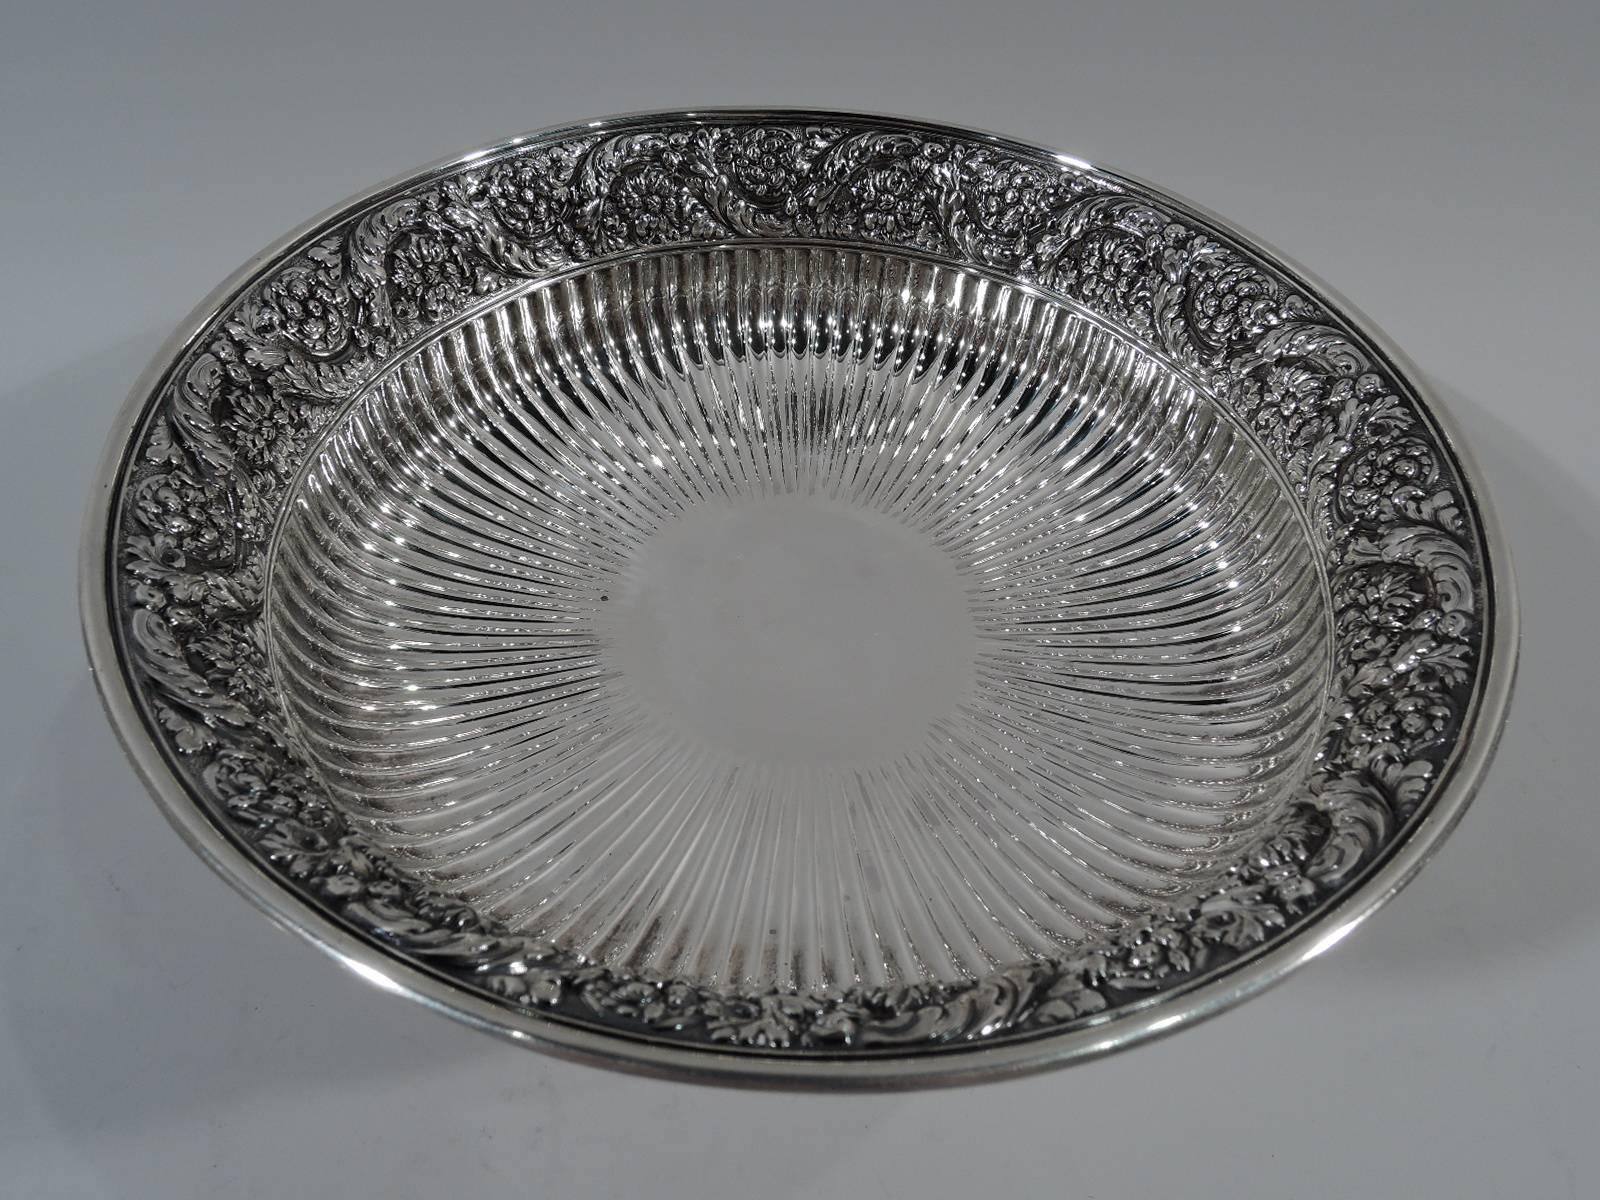 Sterling silver compote. Made by Tiffany & Co. in New York, circa 1882. Bowl has flat well, tapering sides, and flared rim. Short support with raised foot. Bowl interior has central circular frame (vacant) radiating flutes. Rim interior and foot